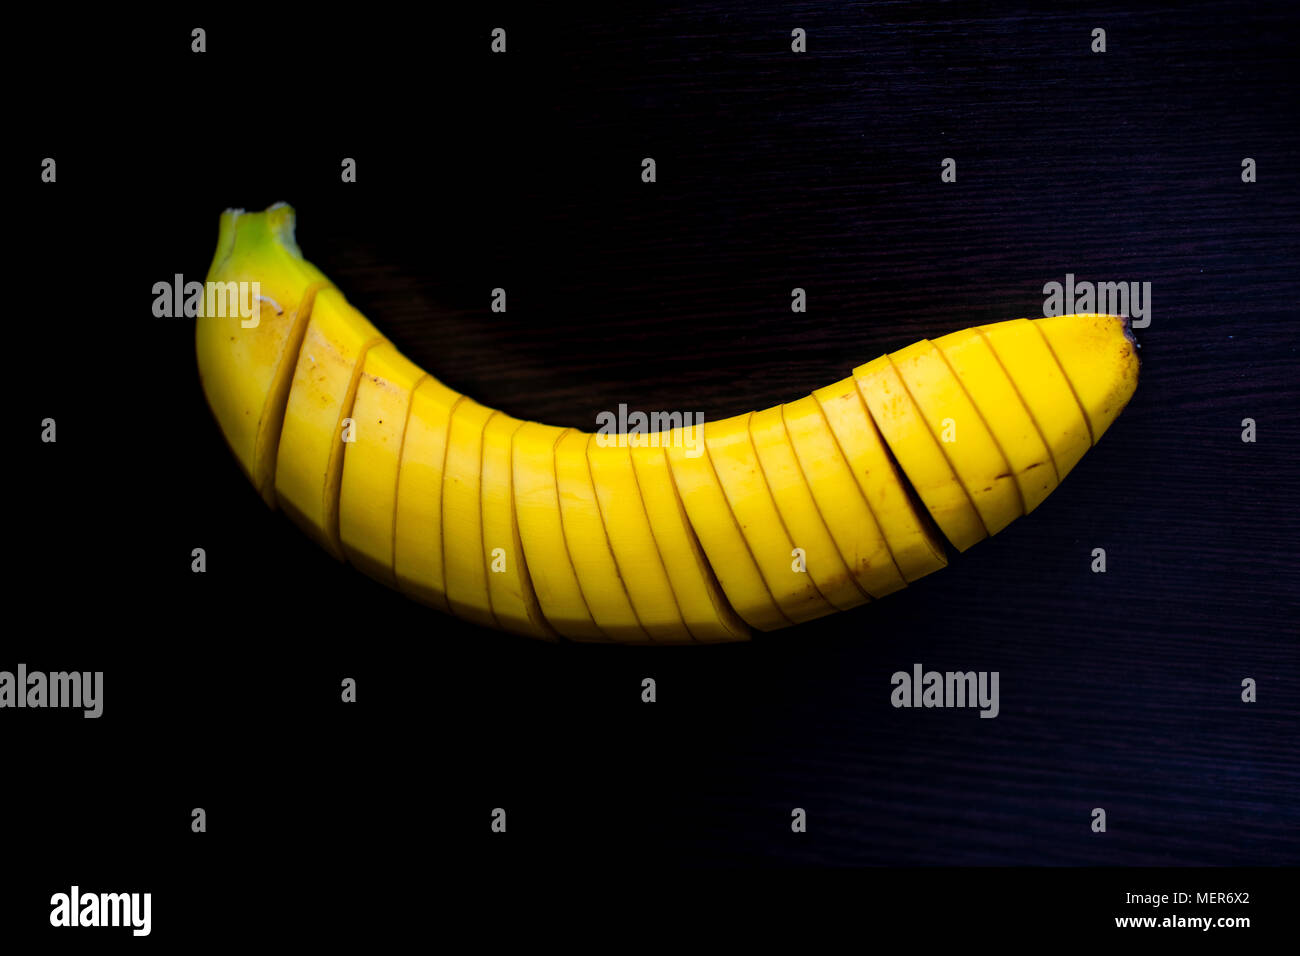 Low key Shot of one banana sliced into pieces Stock Photo